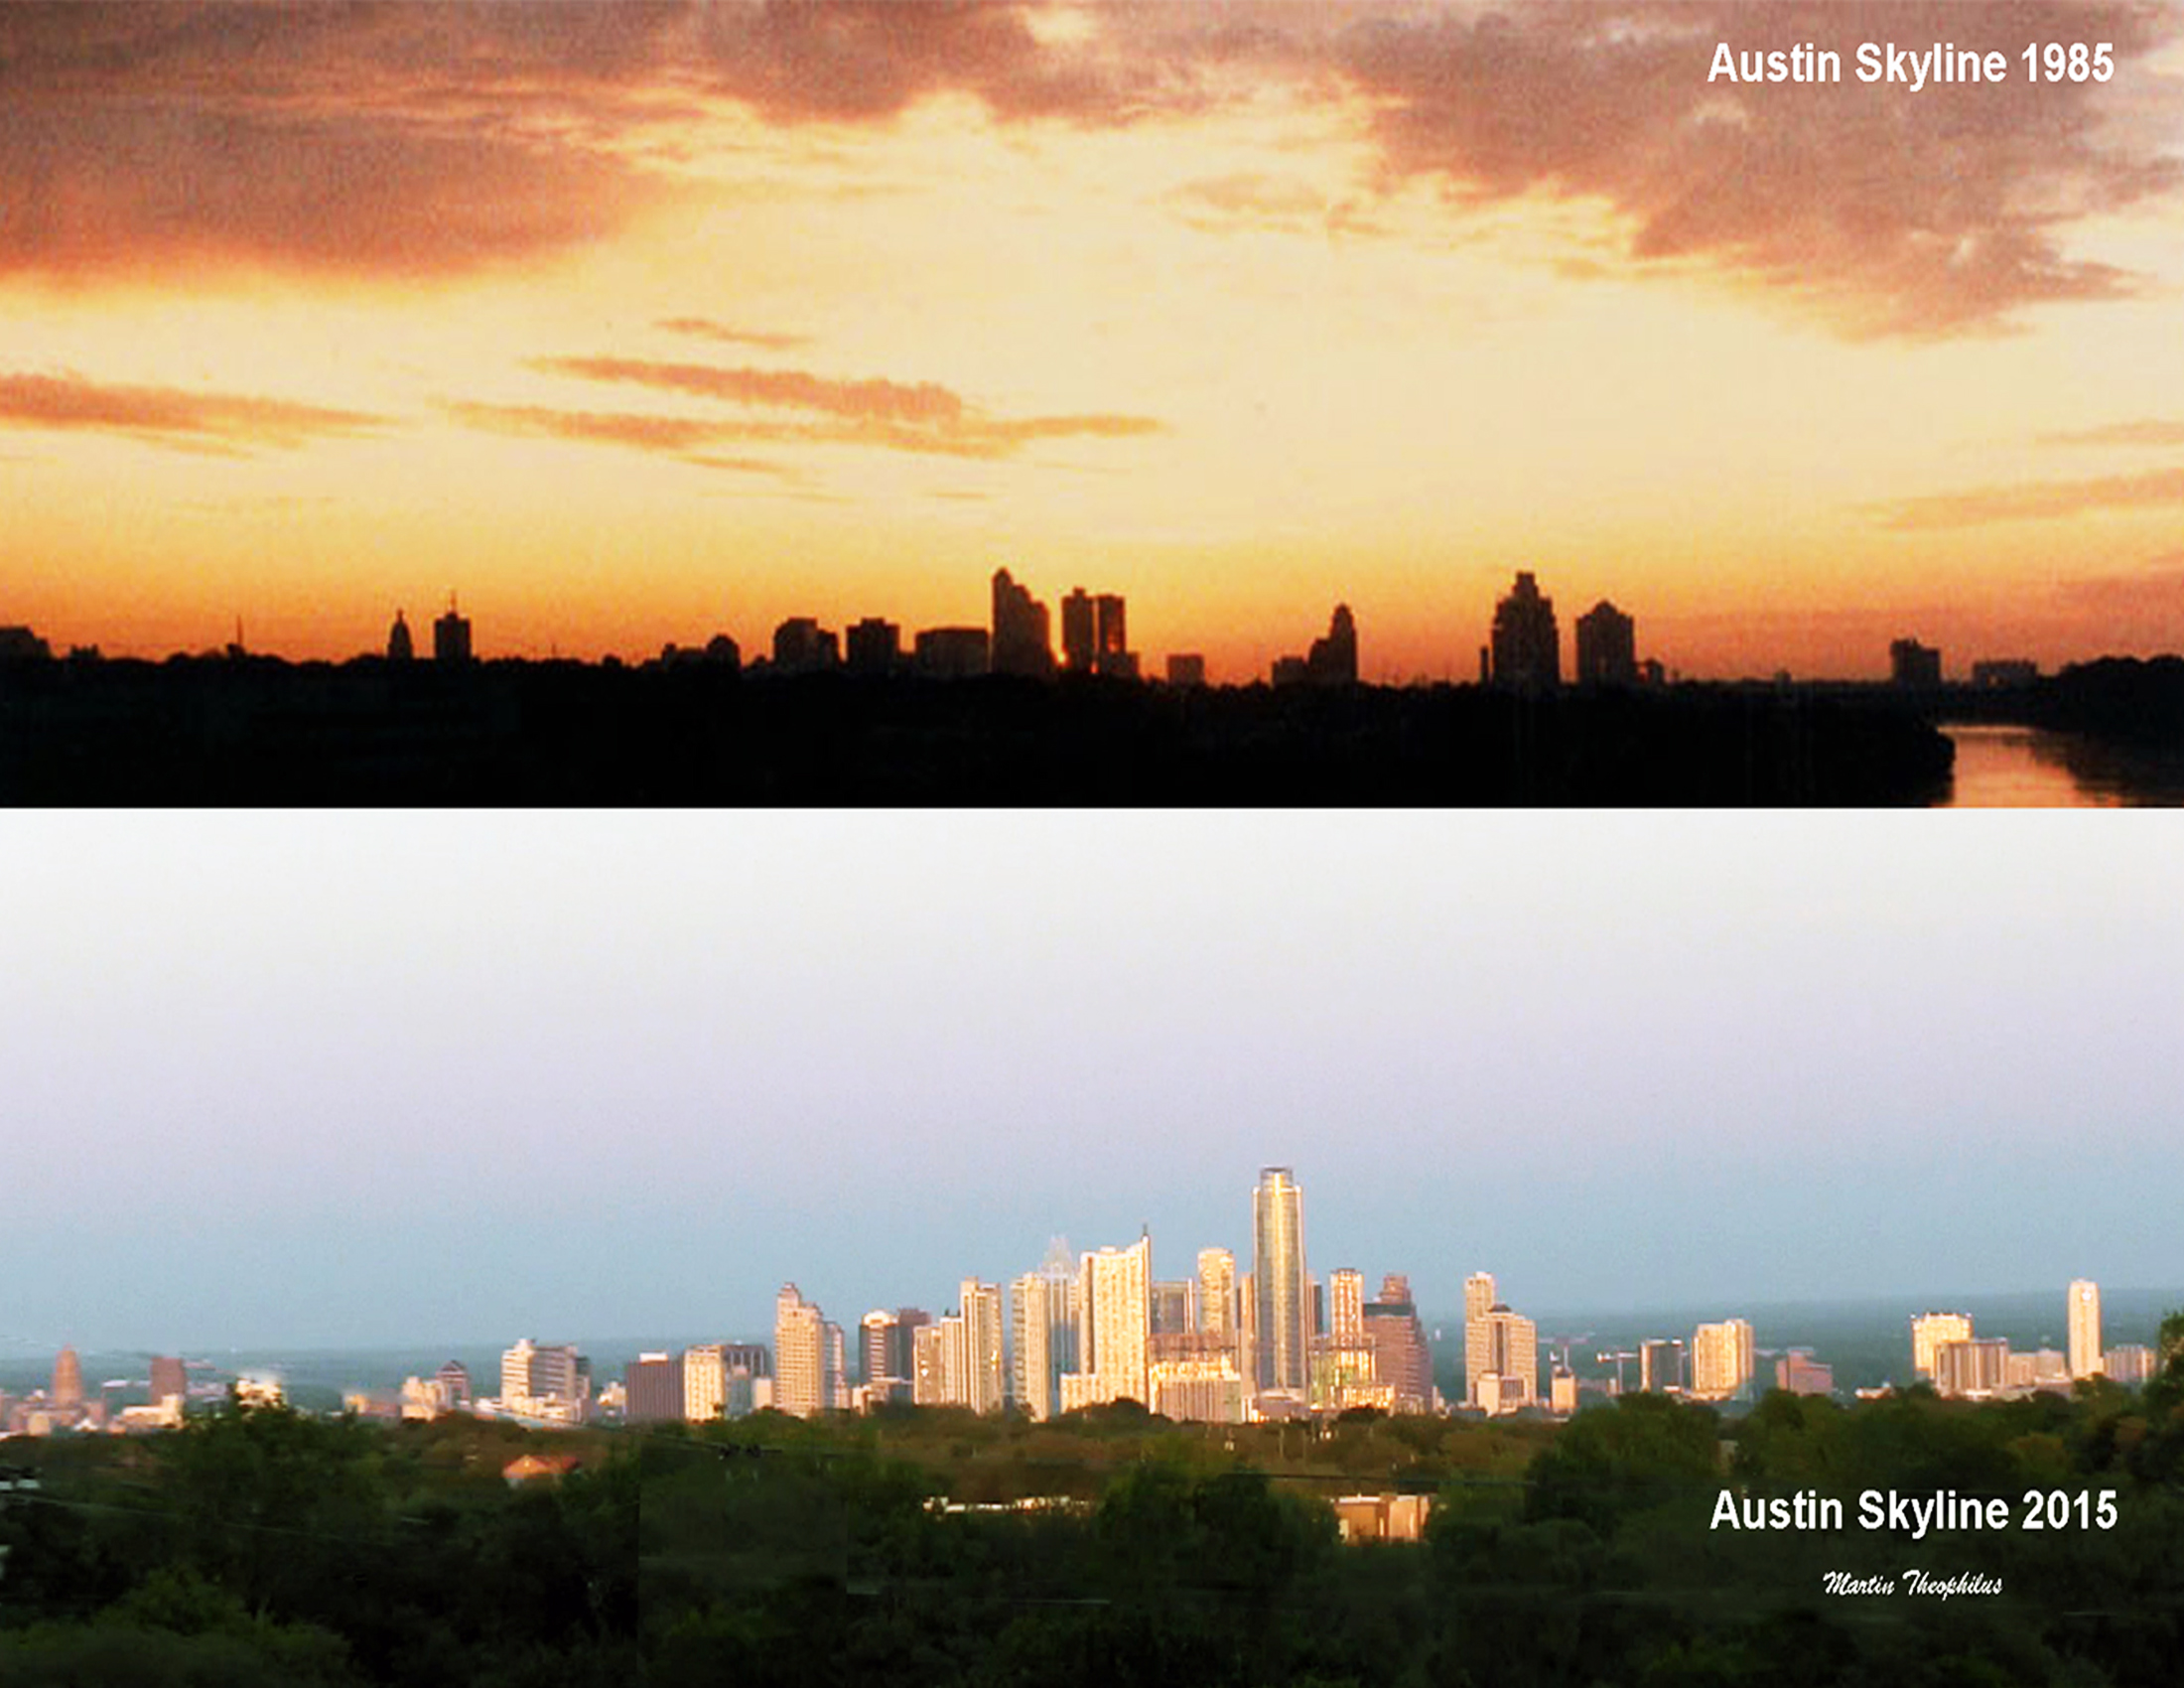 Austin, Texas in 1985 and 2015